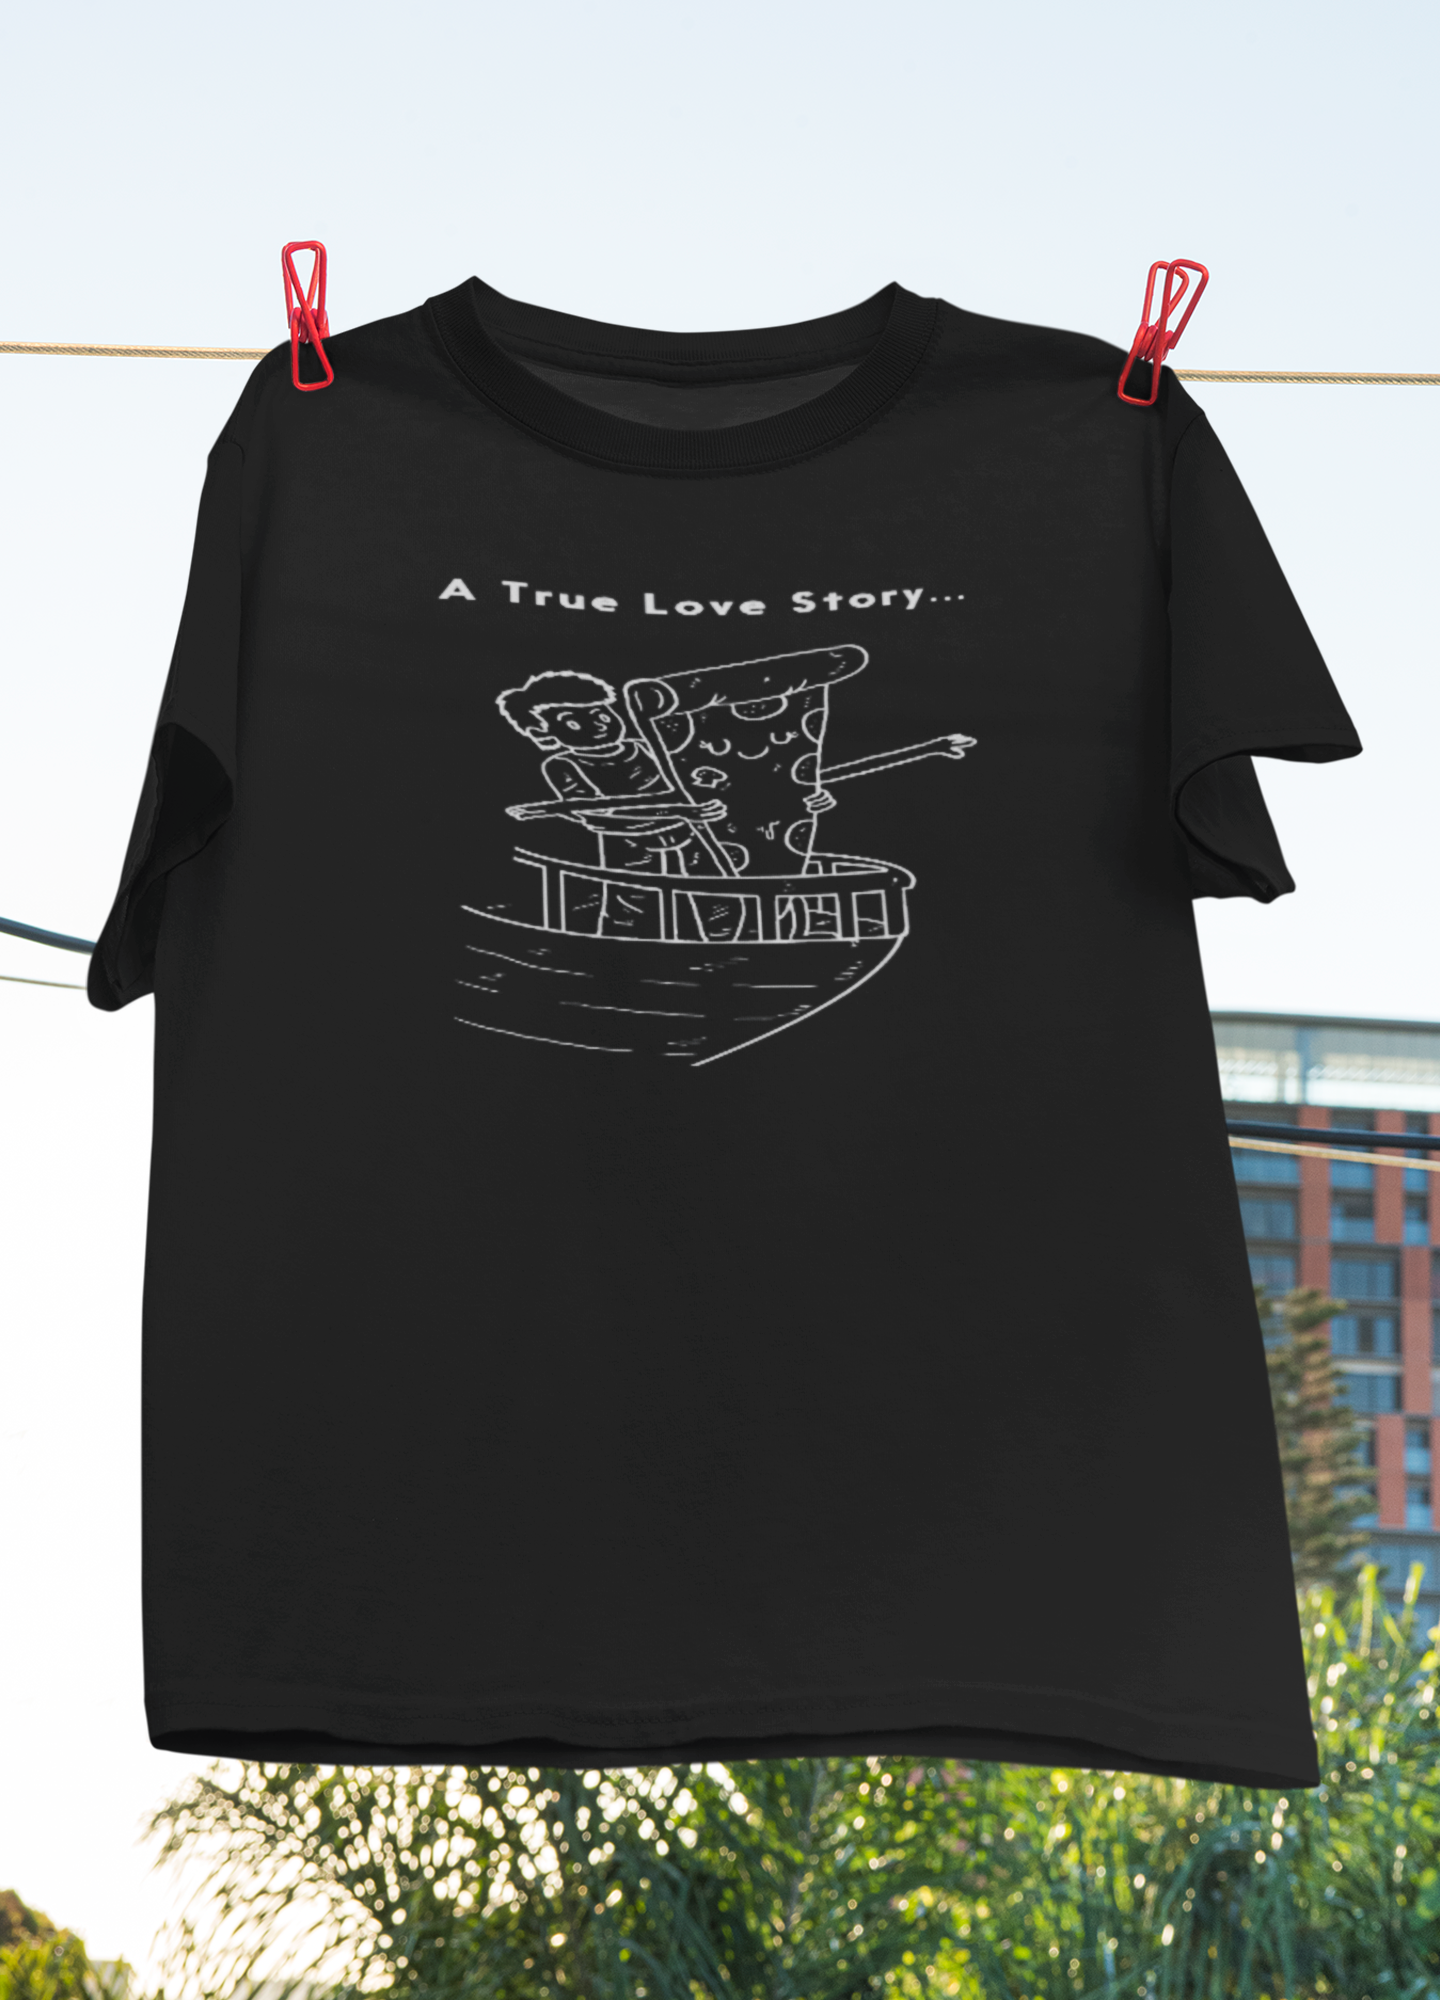 1 Titanic Pizza - A True Love Story... Obnoxious Apparel - Funny Offensive Shirts for Men